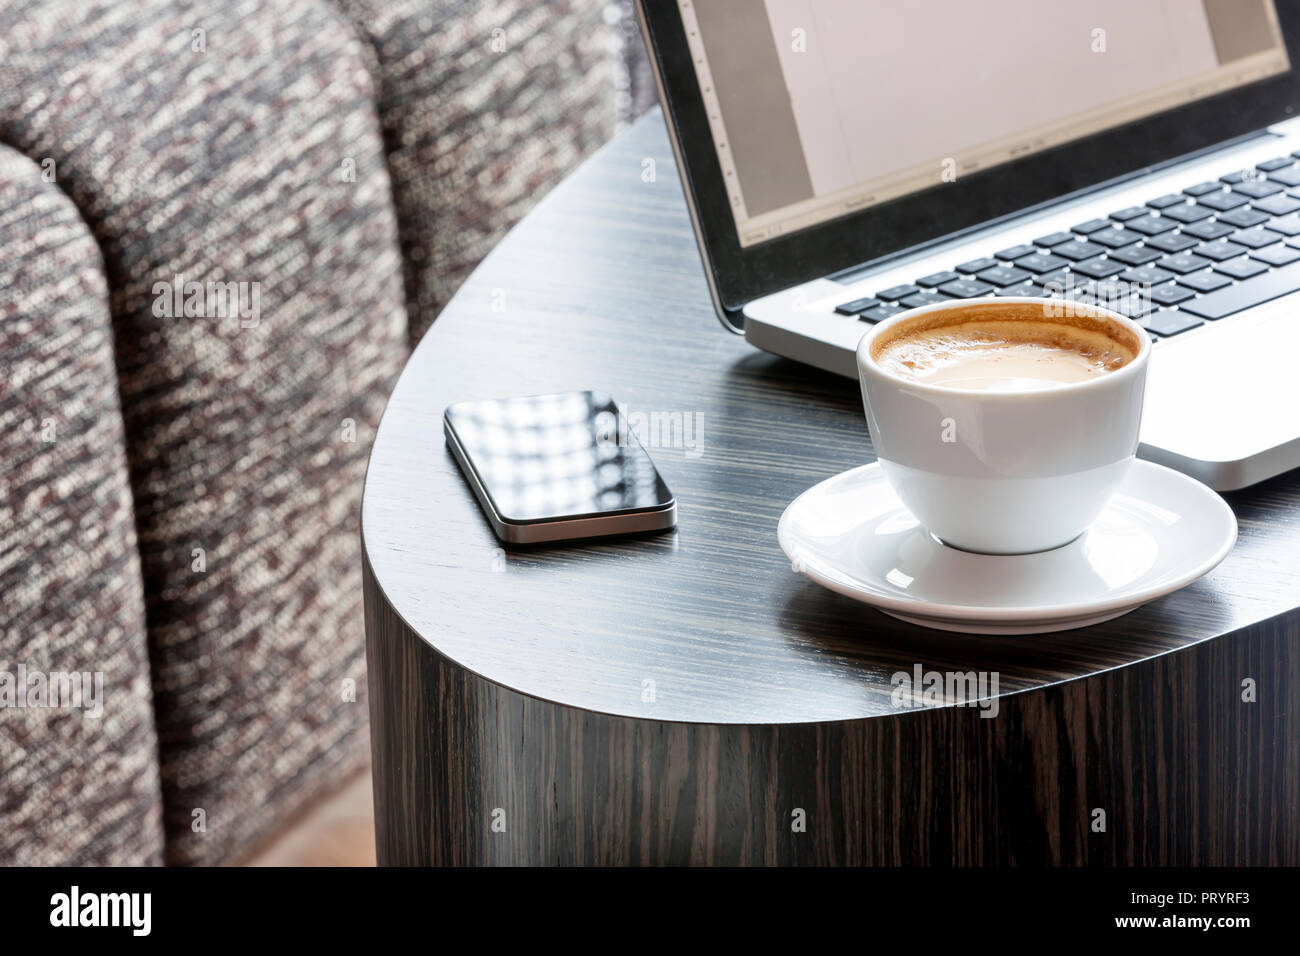 Poland, Warsaw, laptop, smartphone and coffee cup at lounge of hotel Stock Photo